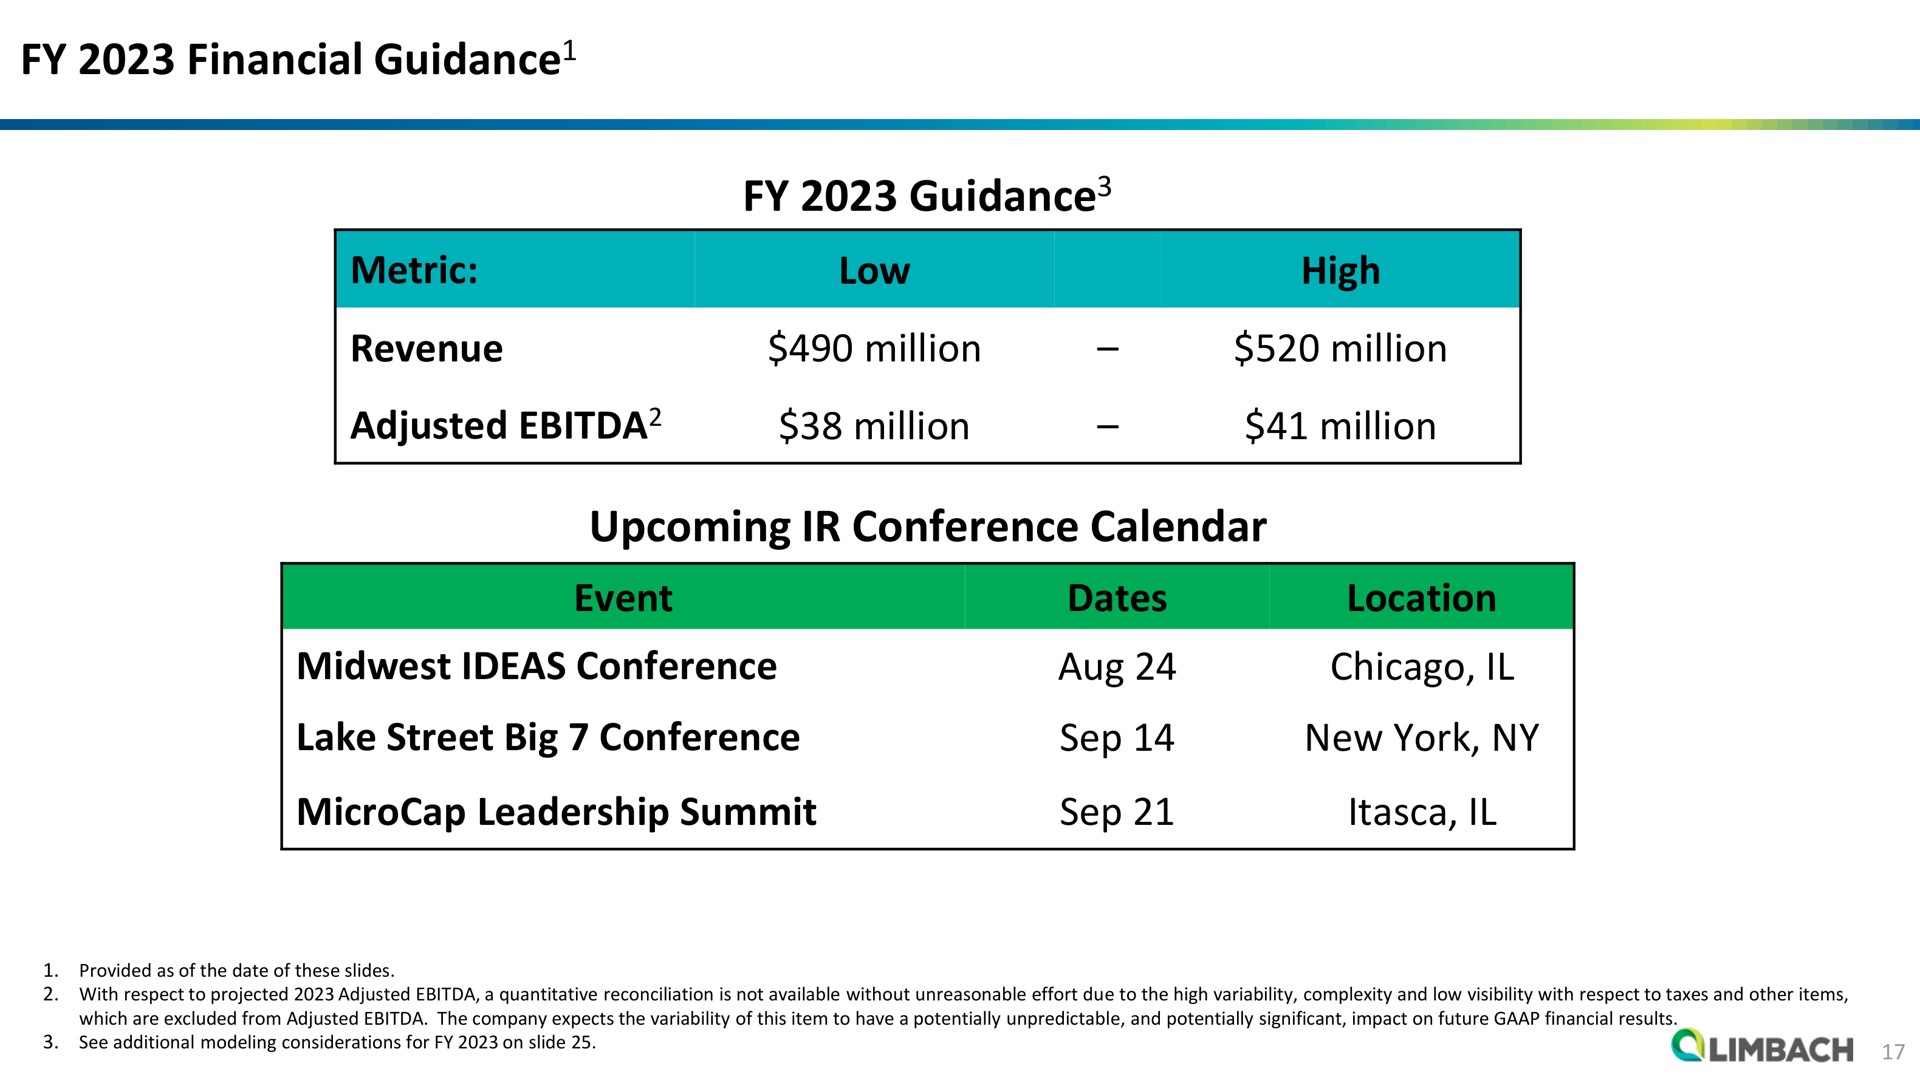 financial guidance guidance metric revenue low million adjusted million high million million upcoming conference calendar event ideas conference lake street big conference leadership summit dates location new york guidance guidance | Limbach Holdings